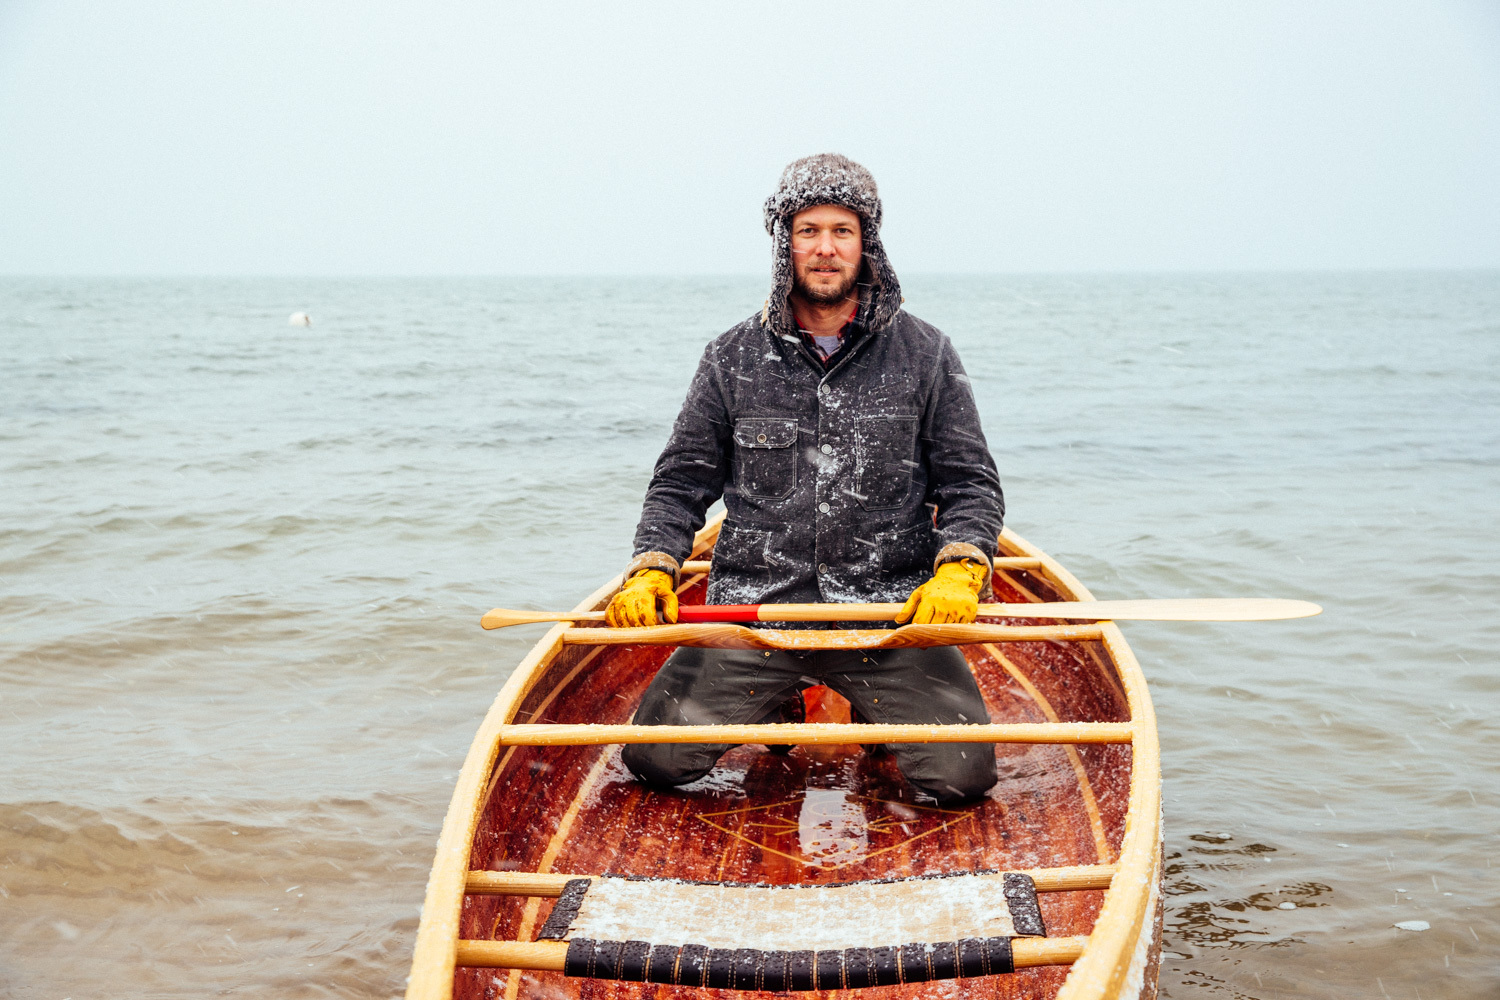 Trent Preszler Builds $100K Canoes, But the First One He Made Is Priceless